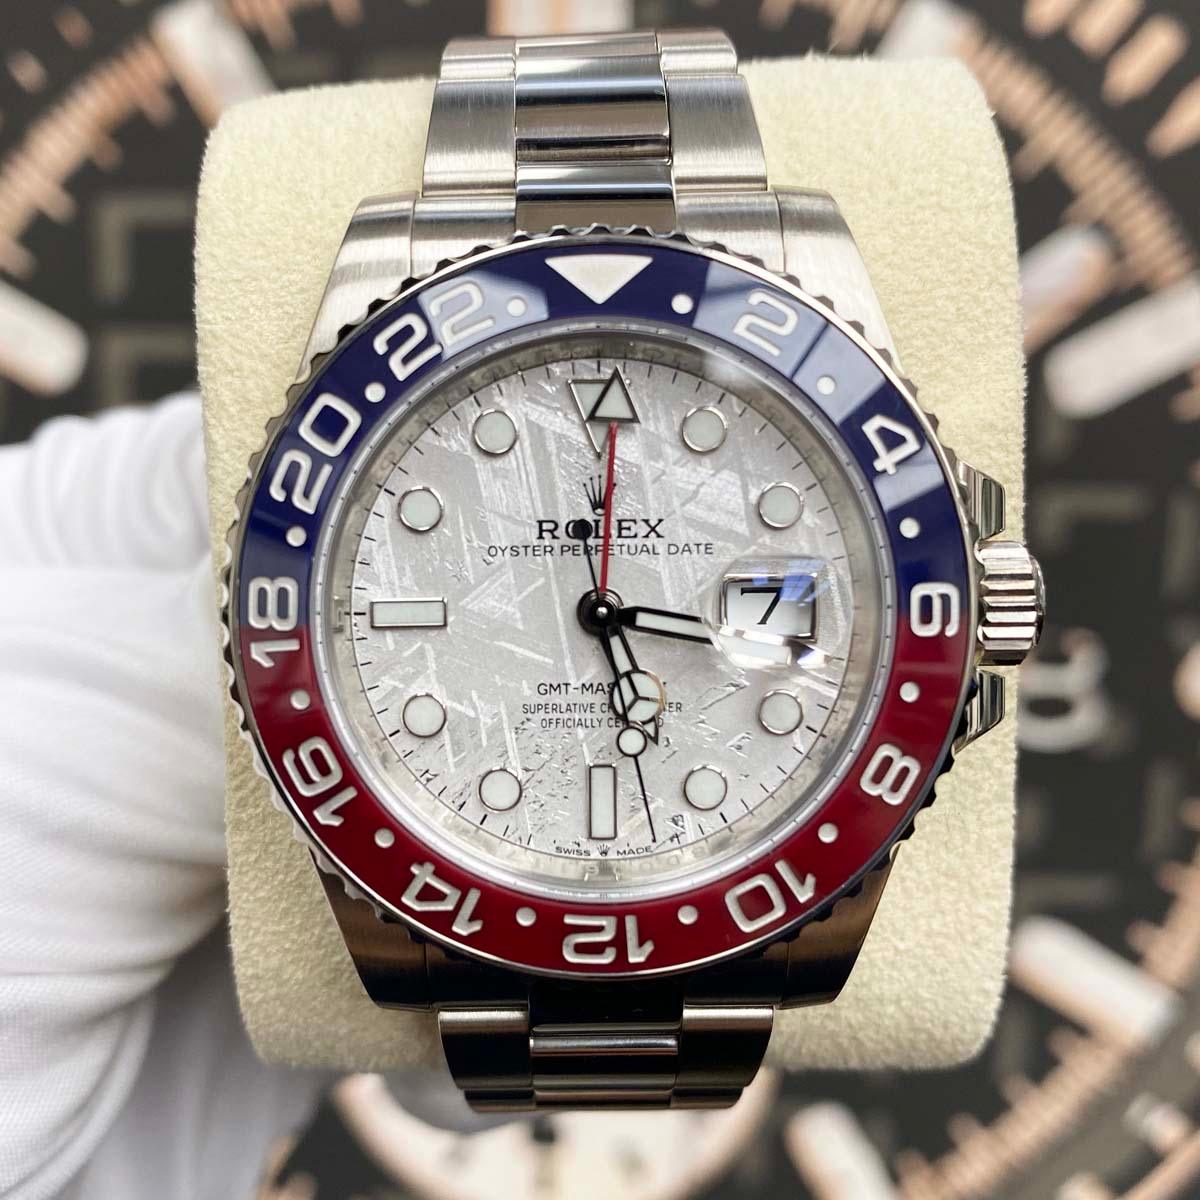 Rolex GMT-Master II "Pepsi" 40mm 126719BLRO White Gold Meteorite Dial Pre-Owned - Gotham Trading 